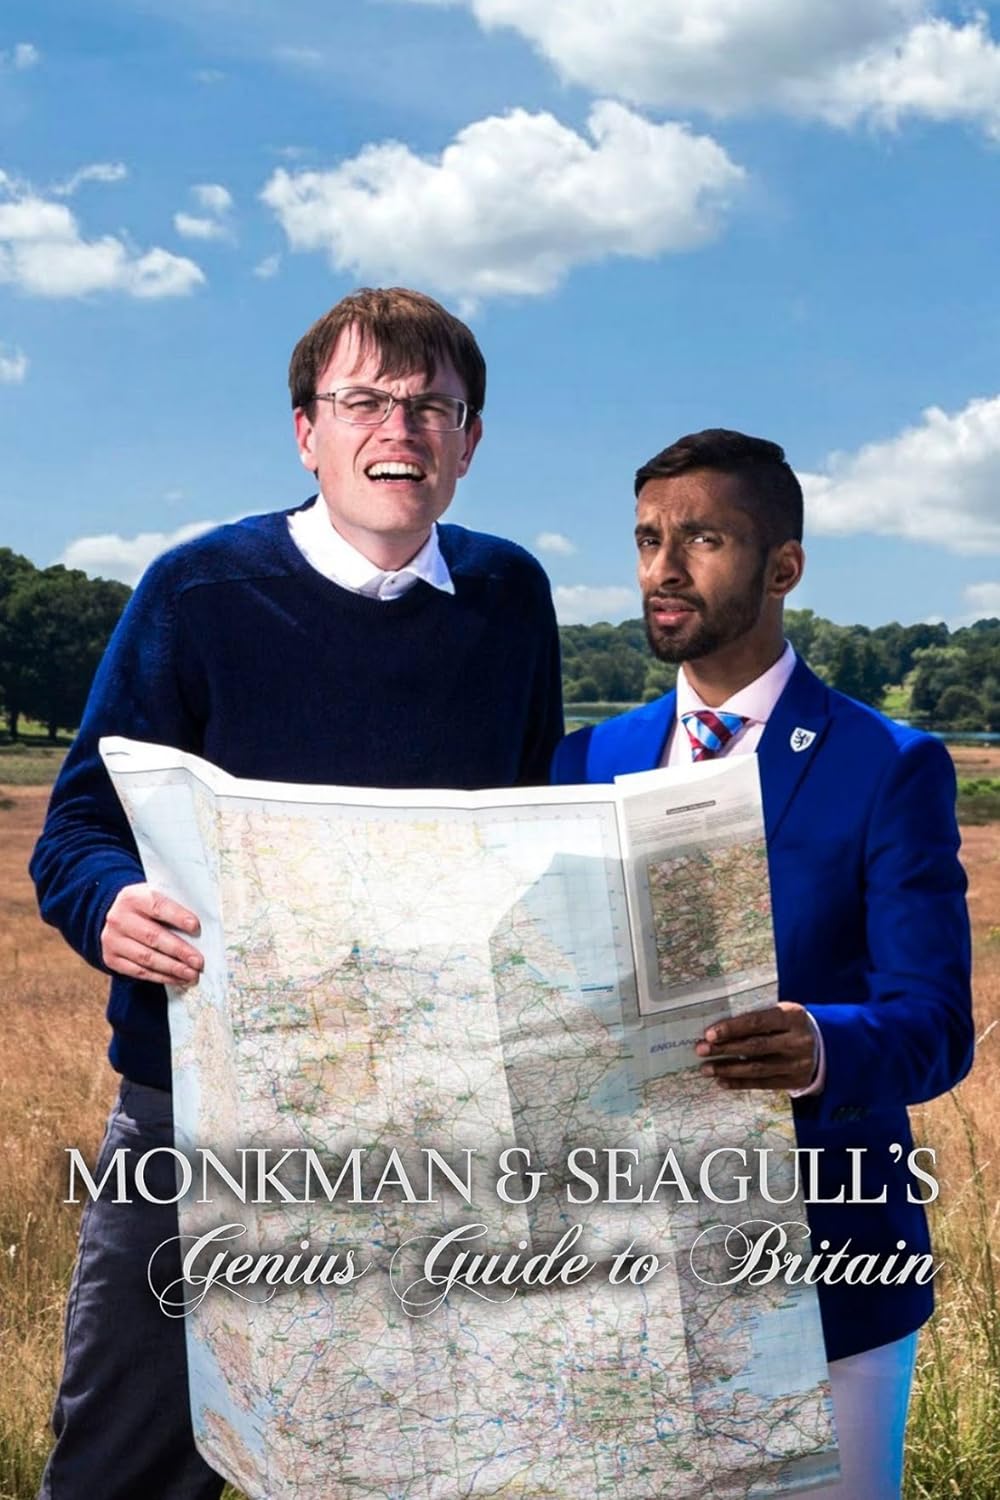 Monkman and Seagull's Genius Guide to Britain